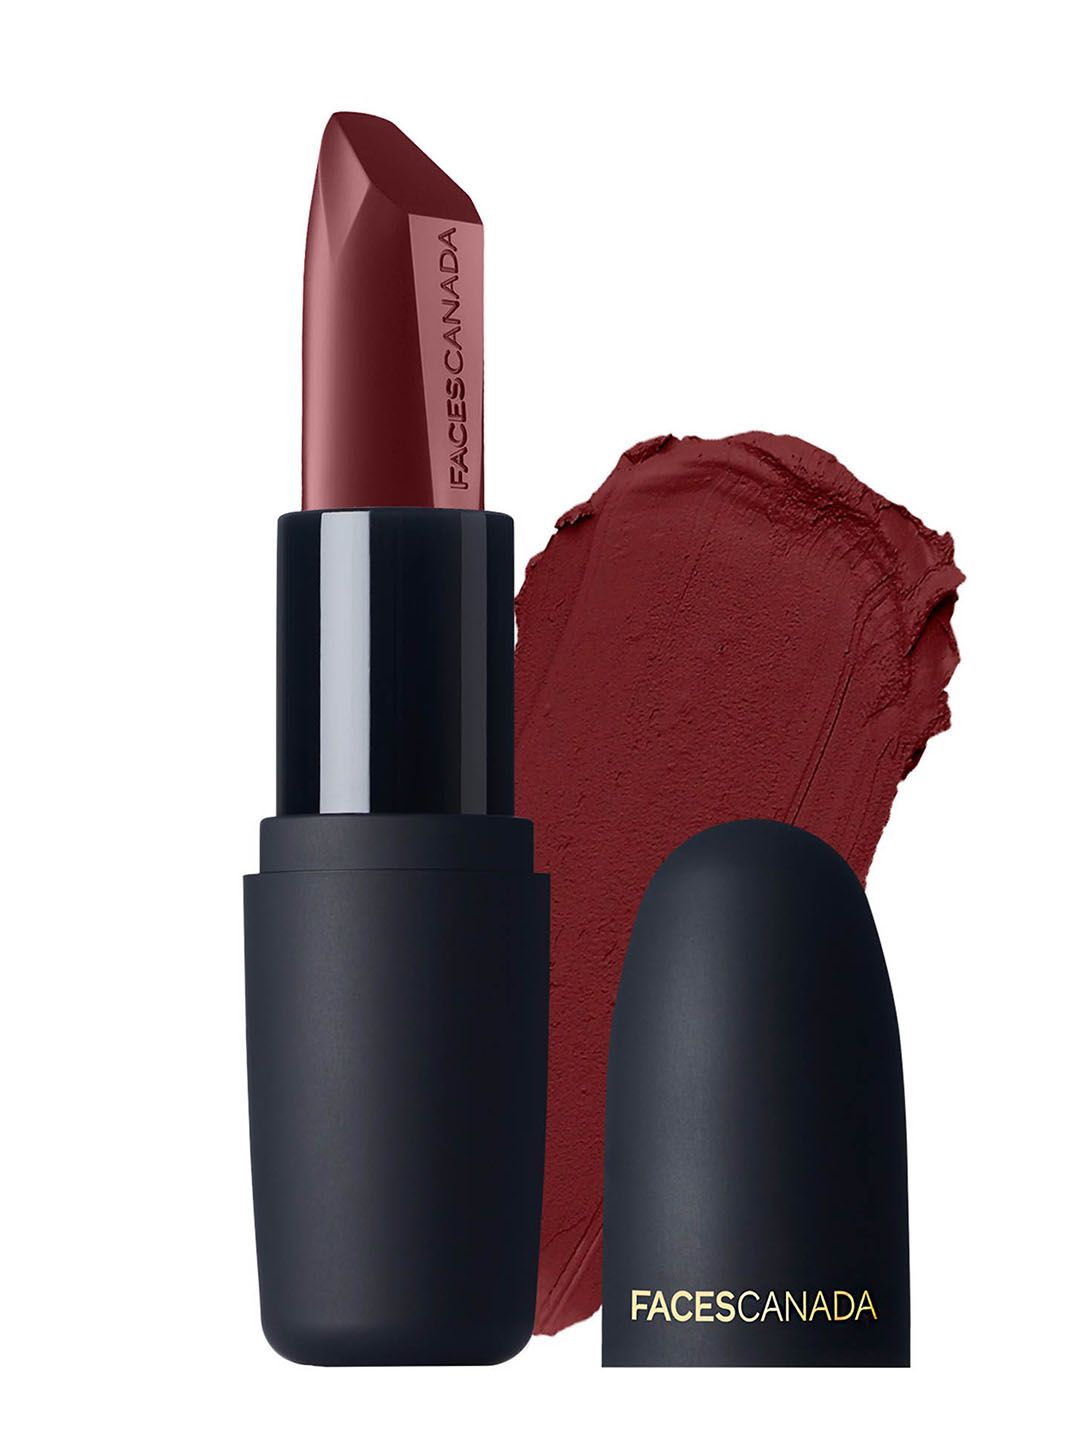 Faces Canada Weightless Matte Hydrating Lipstick with Almond Oil Wine Rouge 4g Price in India